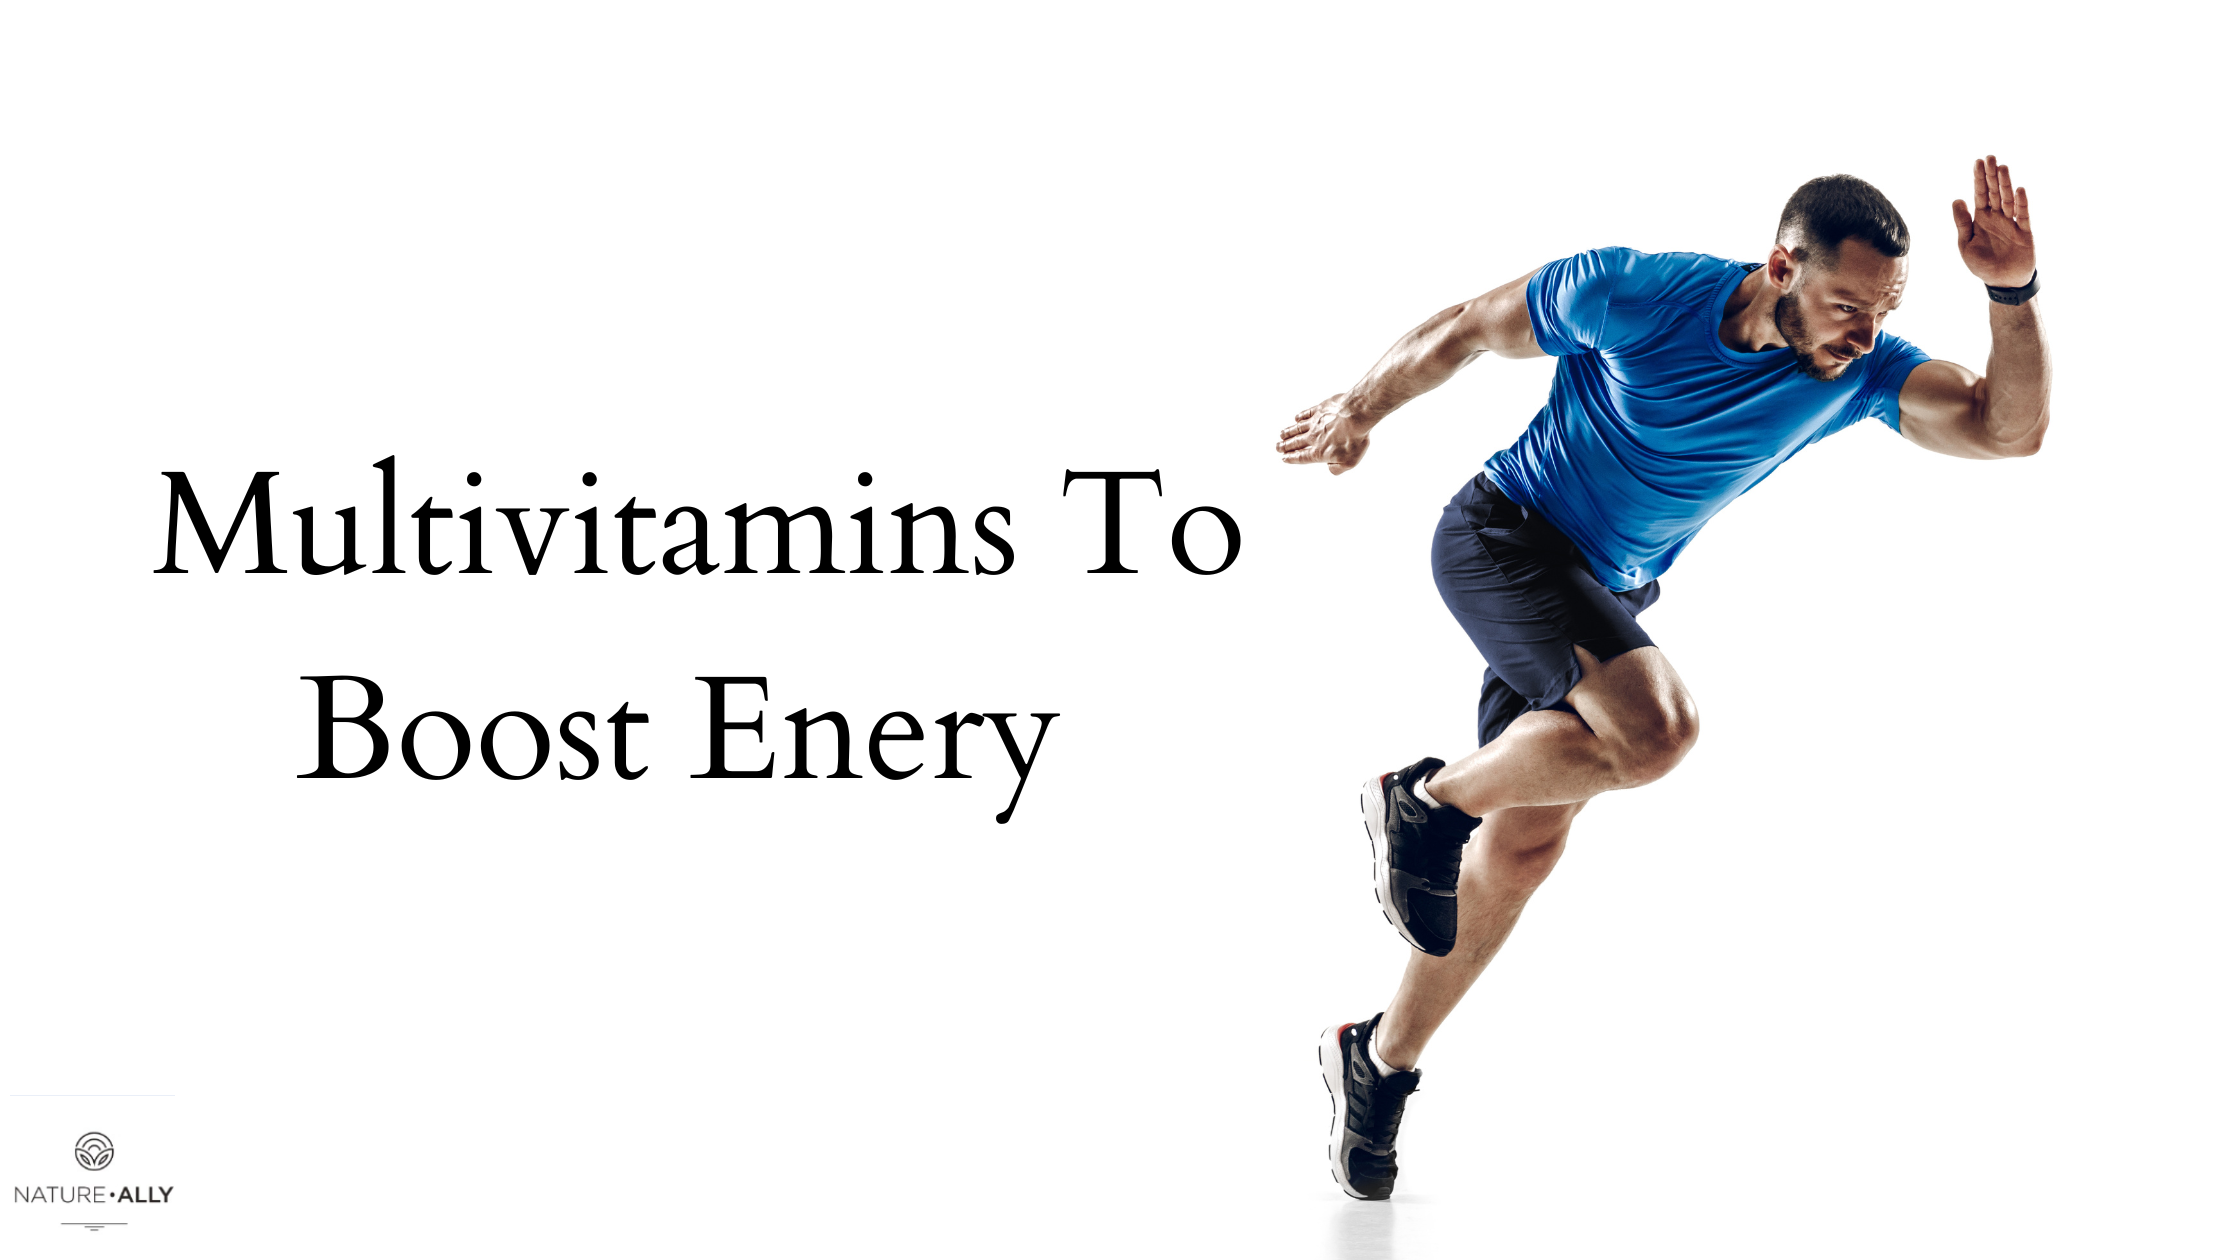 Multivitamins To Boost Energy